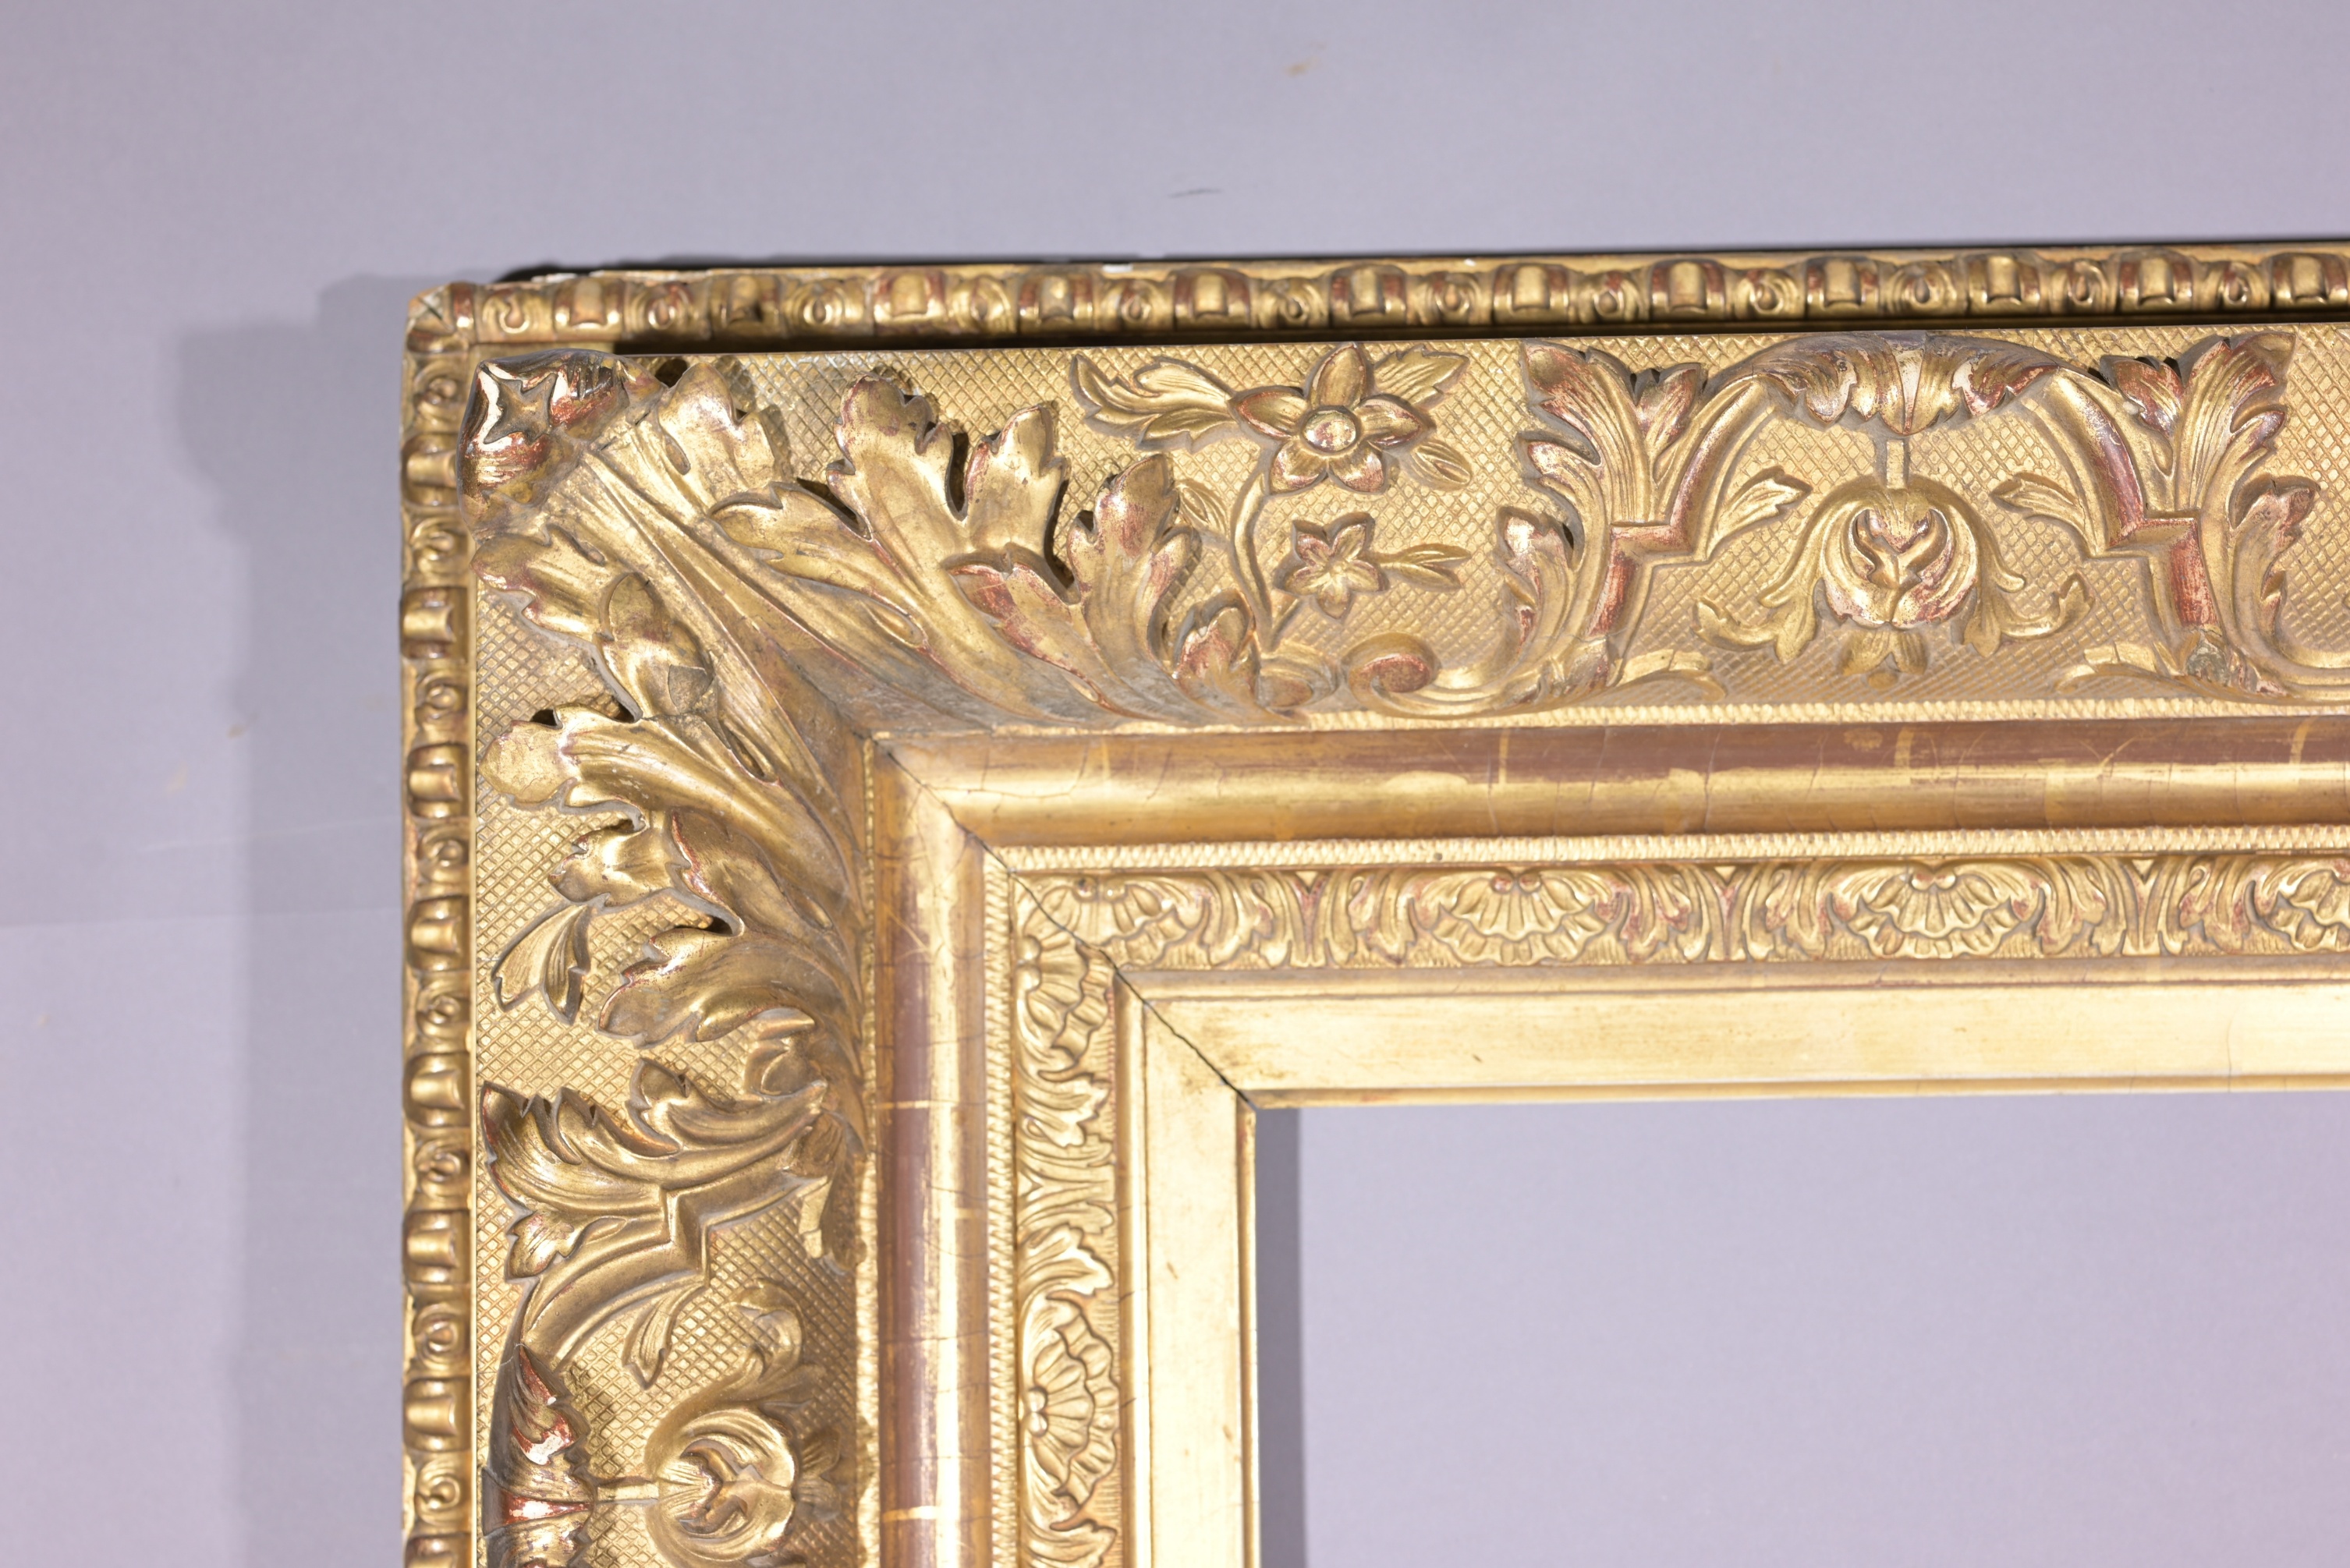 French 19th C Gilt Wood Frame - 37 x 21.75 - Image 3 of 9